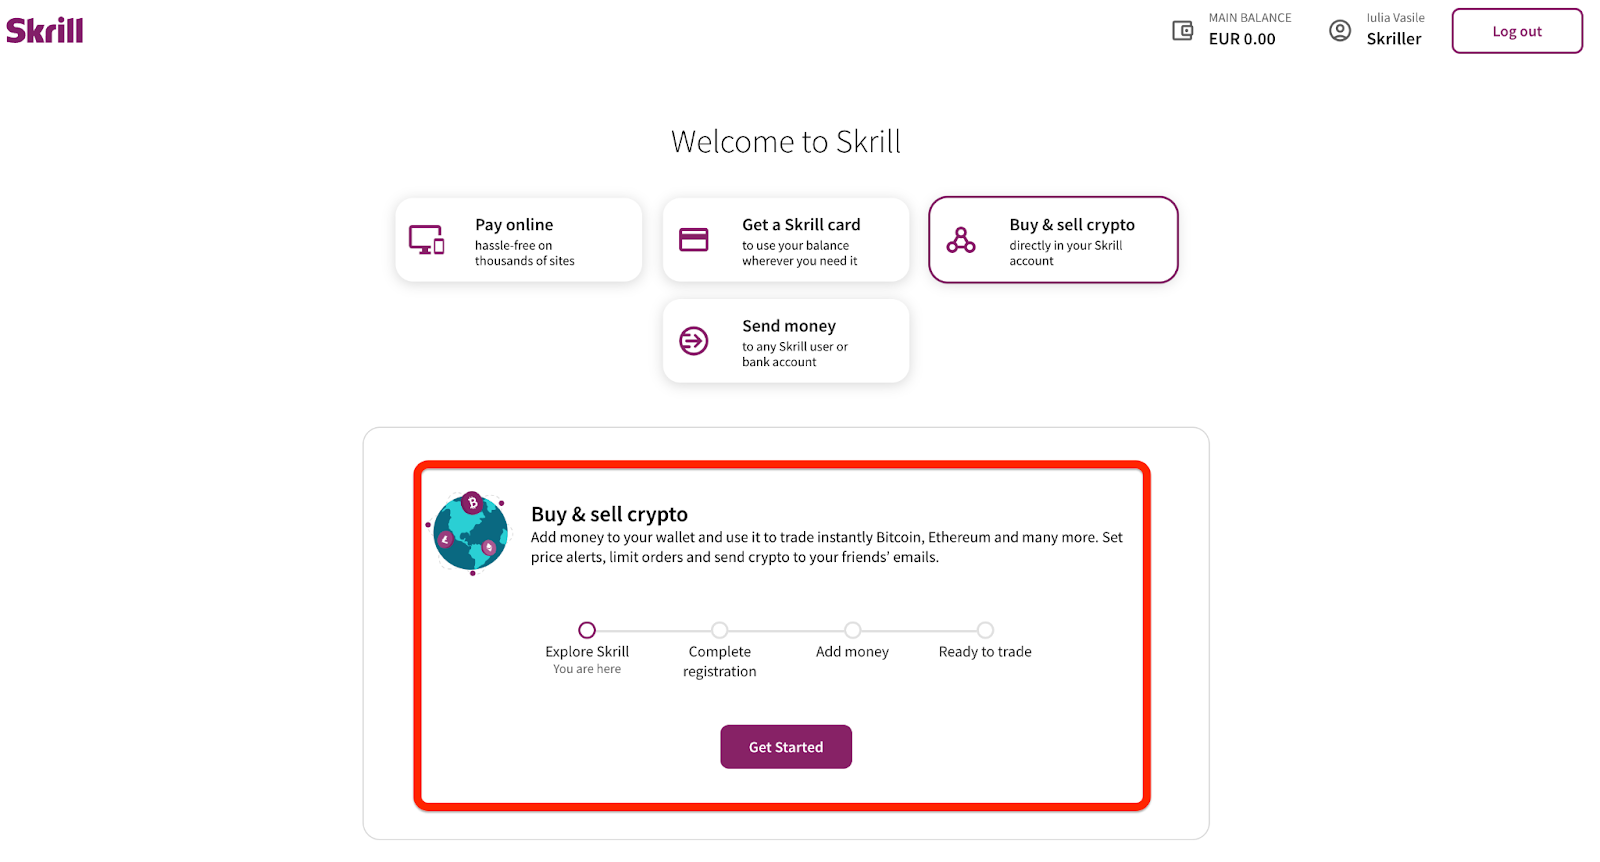 Where & How To Buy Bitcoin With Skrill | Beginner’s Guide